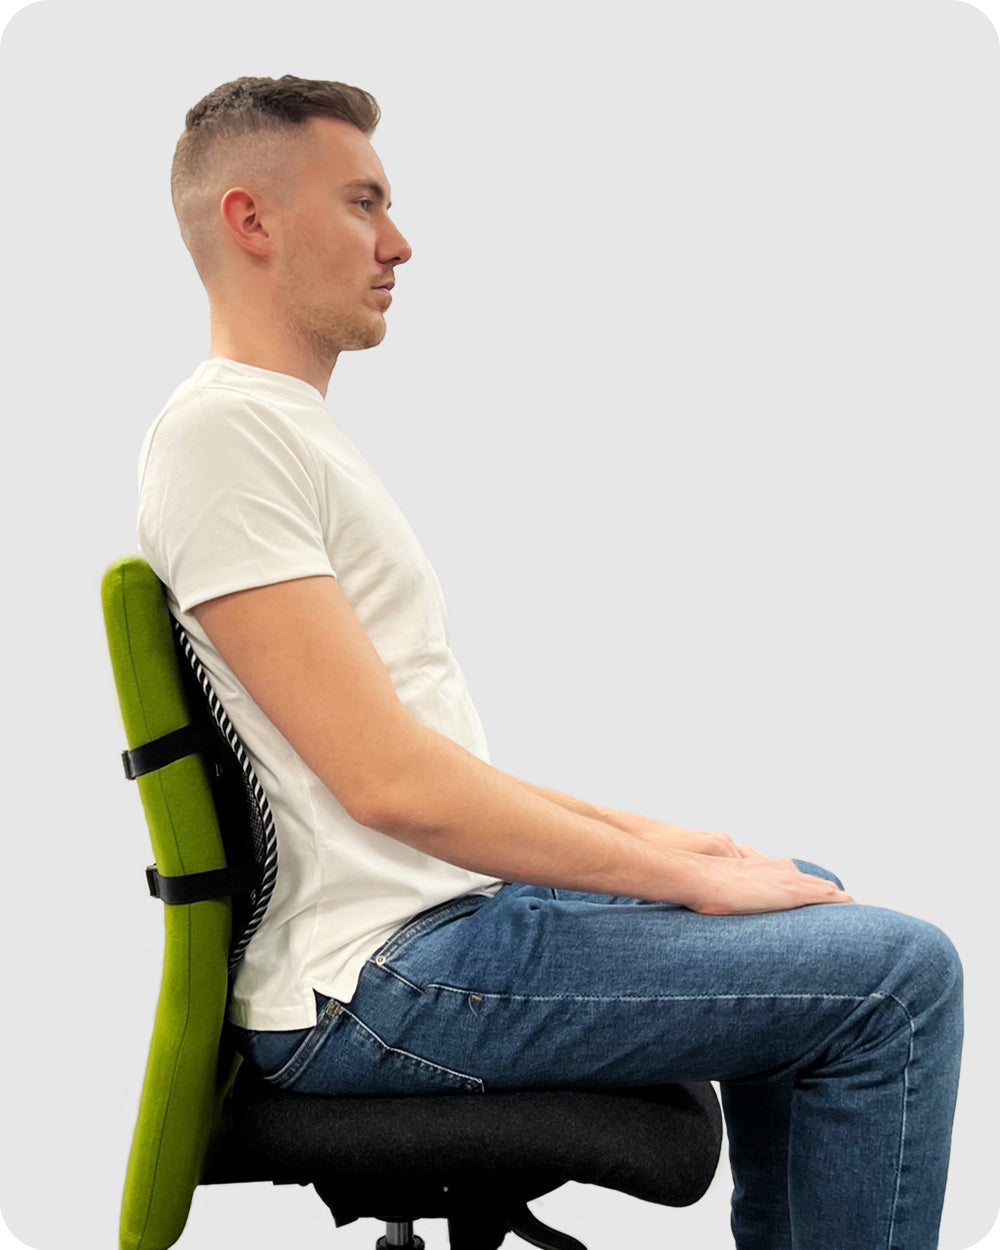 correct sitting posture with chair back support